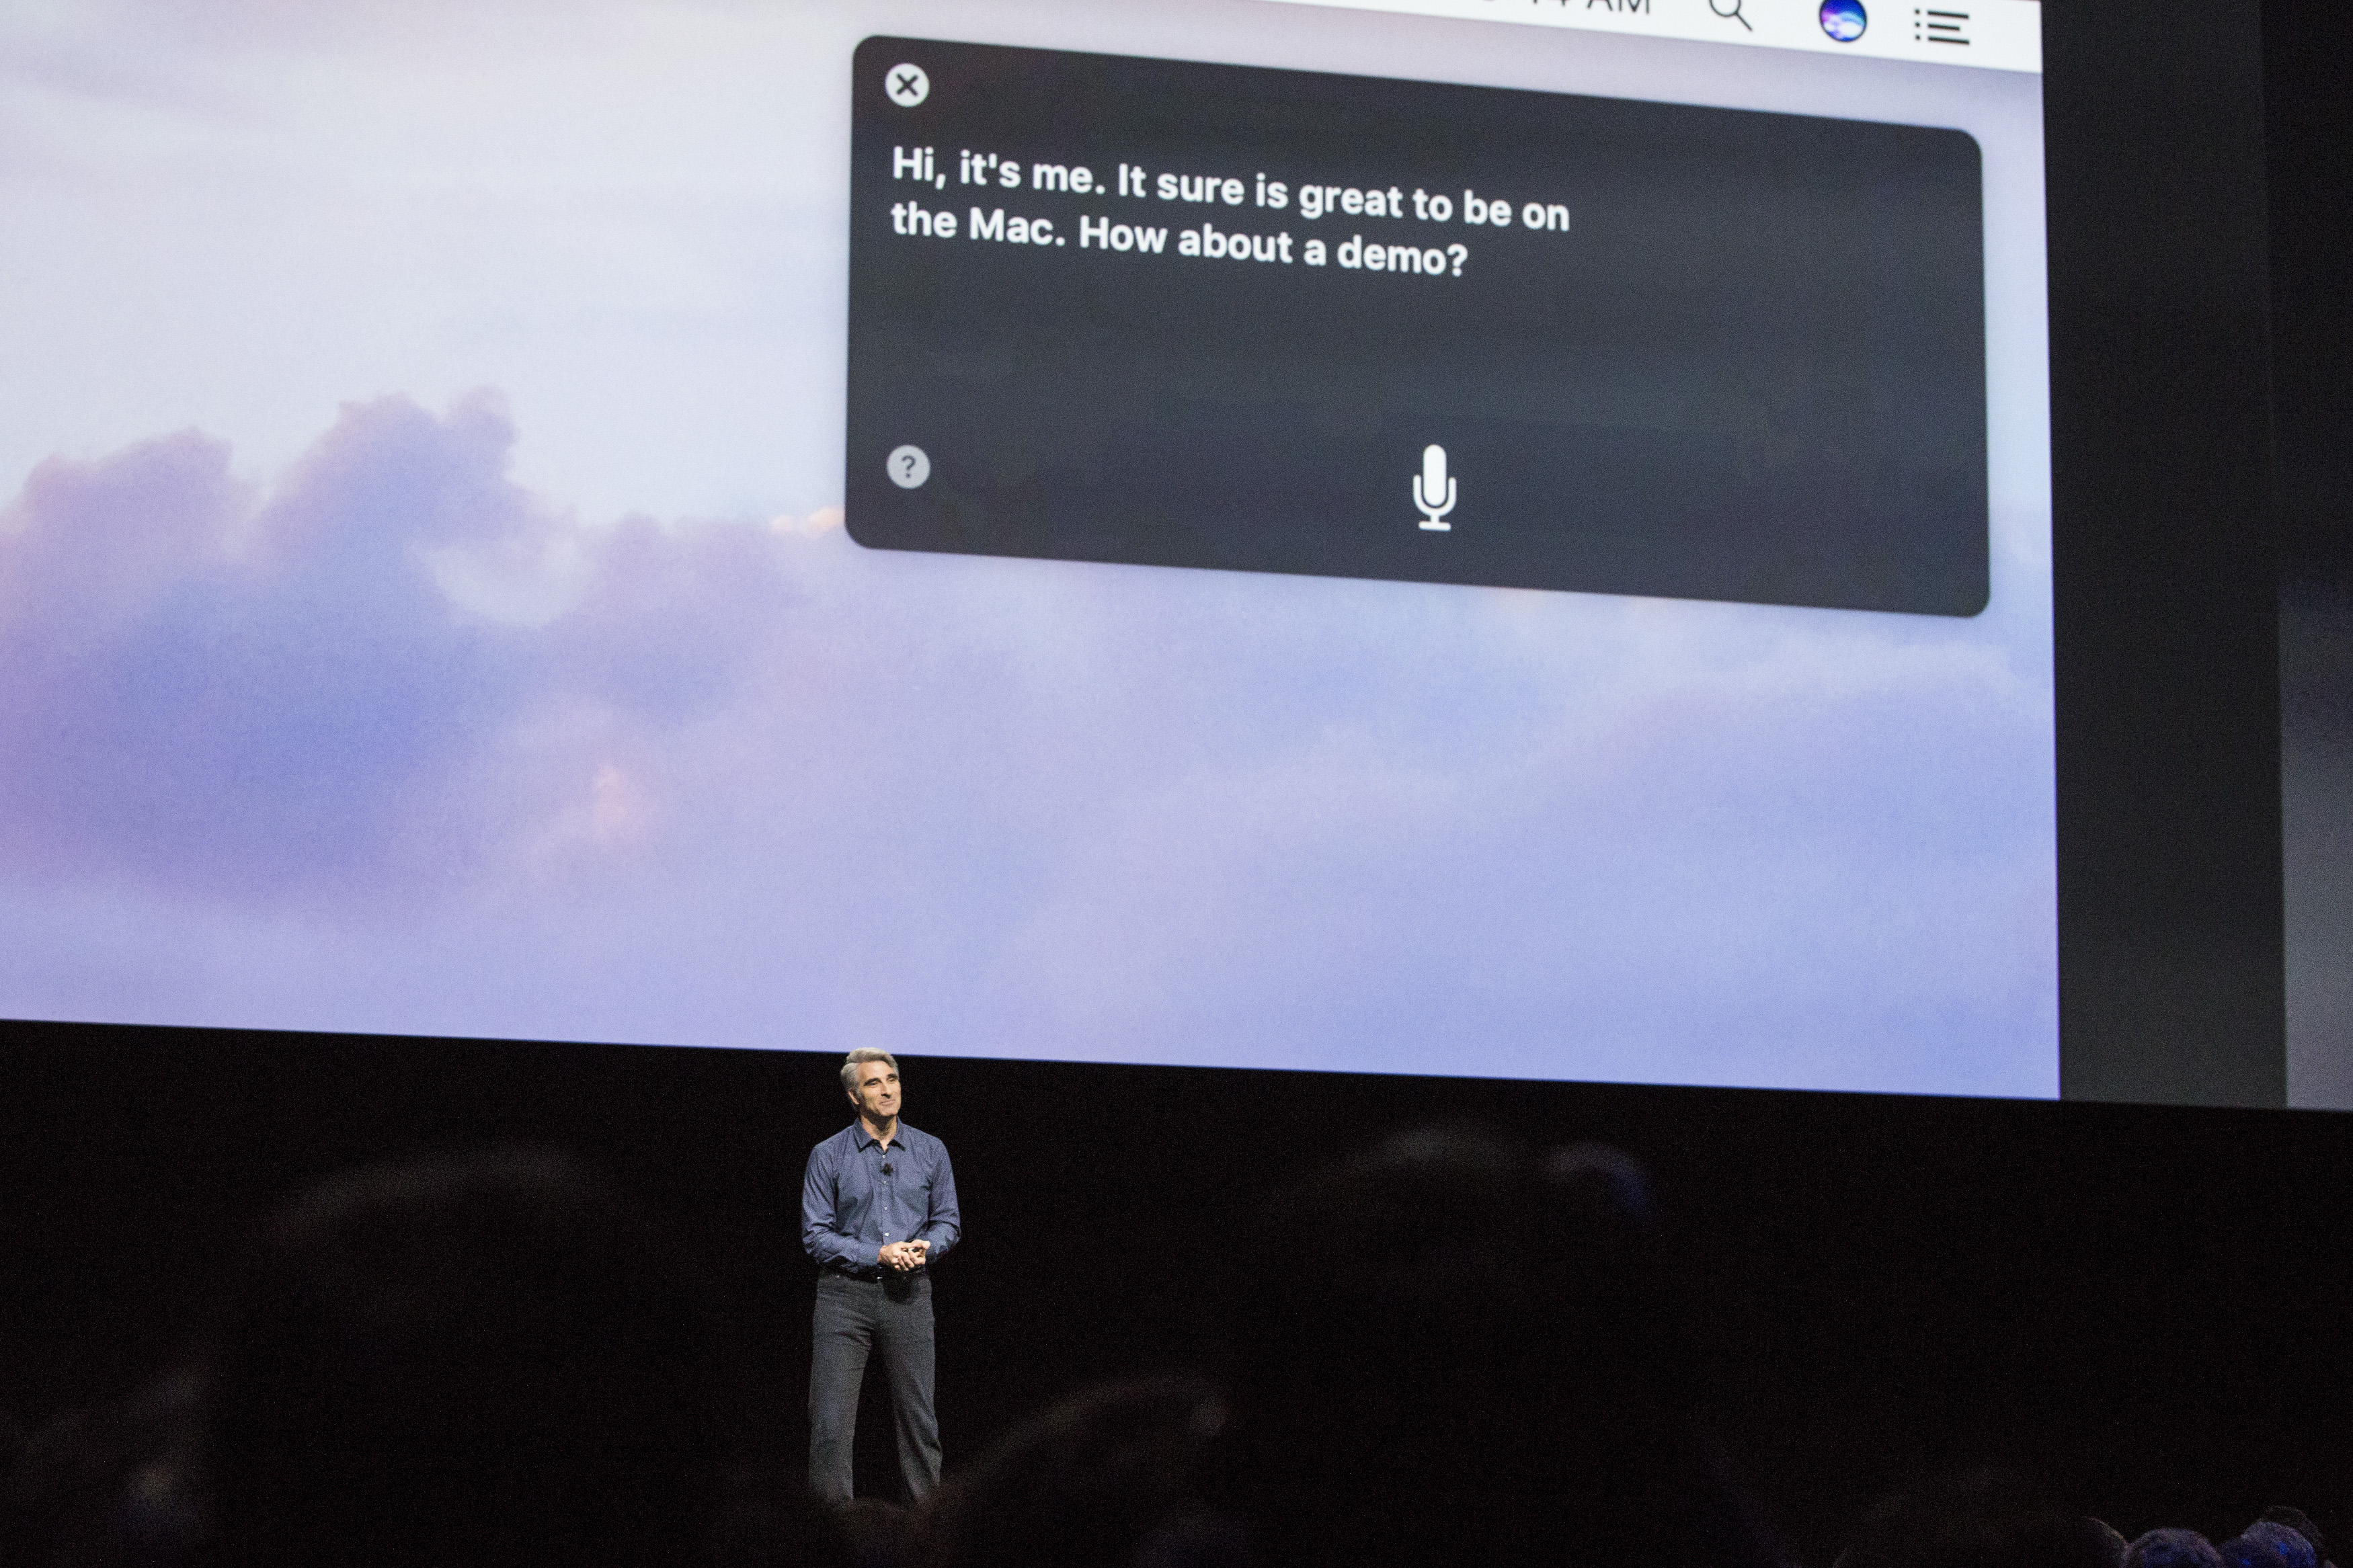 Craig Federighi, Apple's senior vice president of Software Engineering, introduces the new macOS Sierra software at an Apple event at the Worldwide Developer's Conference in San Francisco on June 13, 2016. (Andrew Burton—Getty Images)